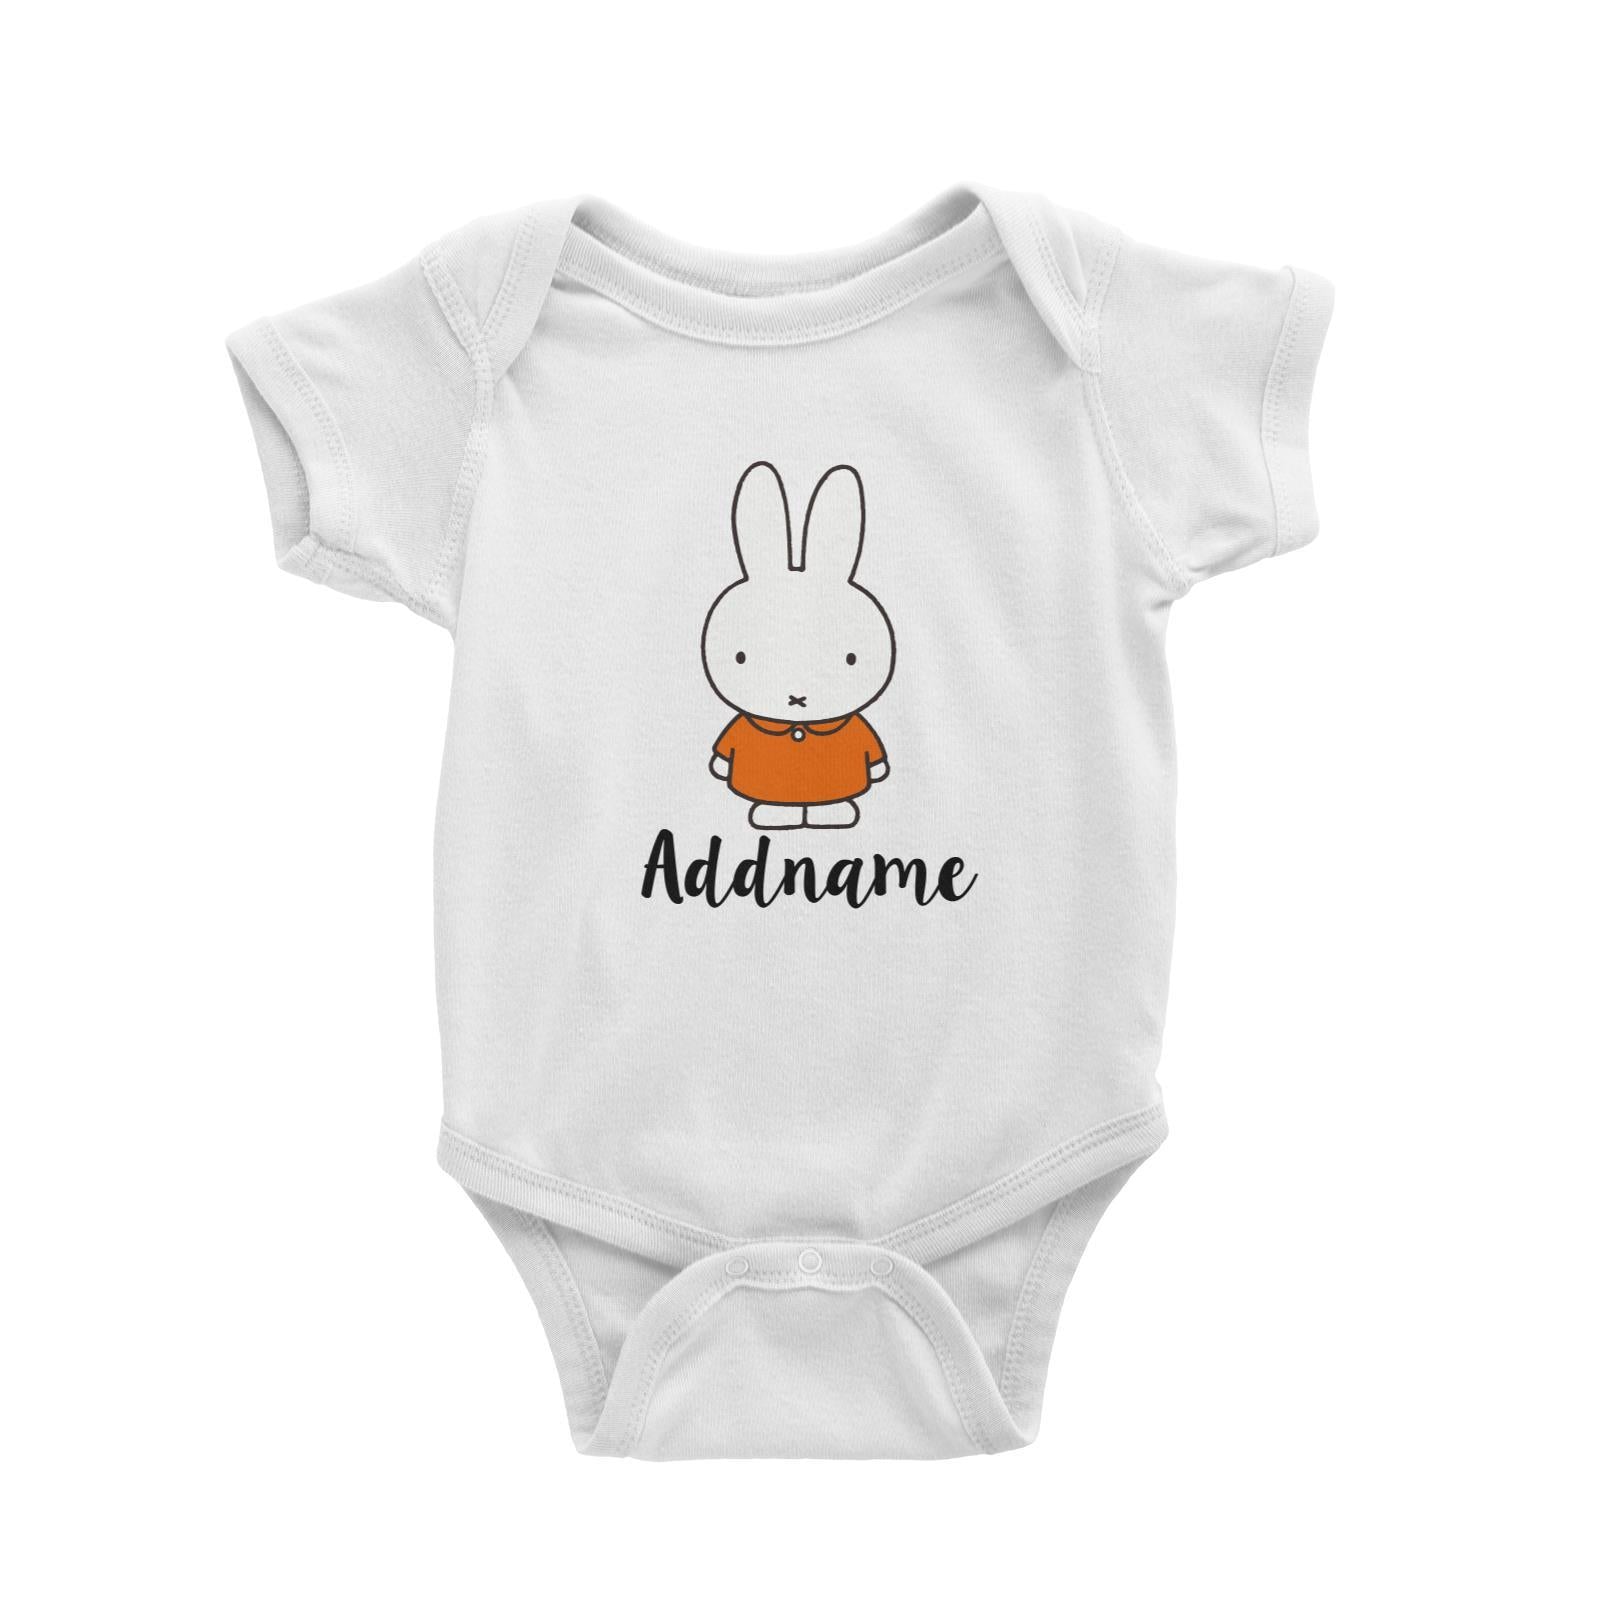 Miffy 2 Addname Baby Romper